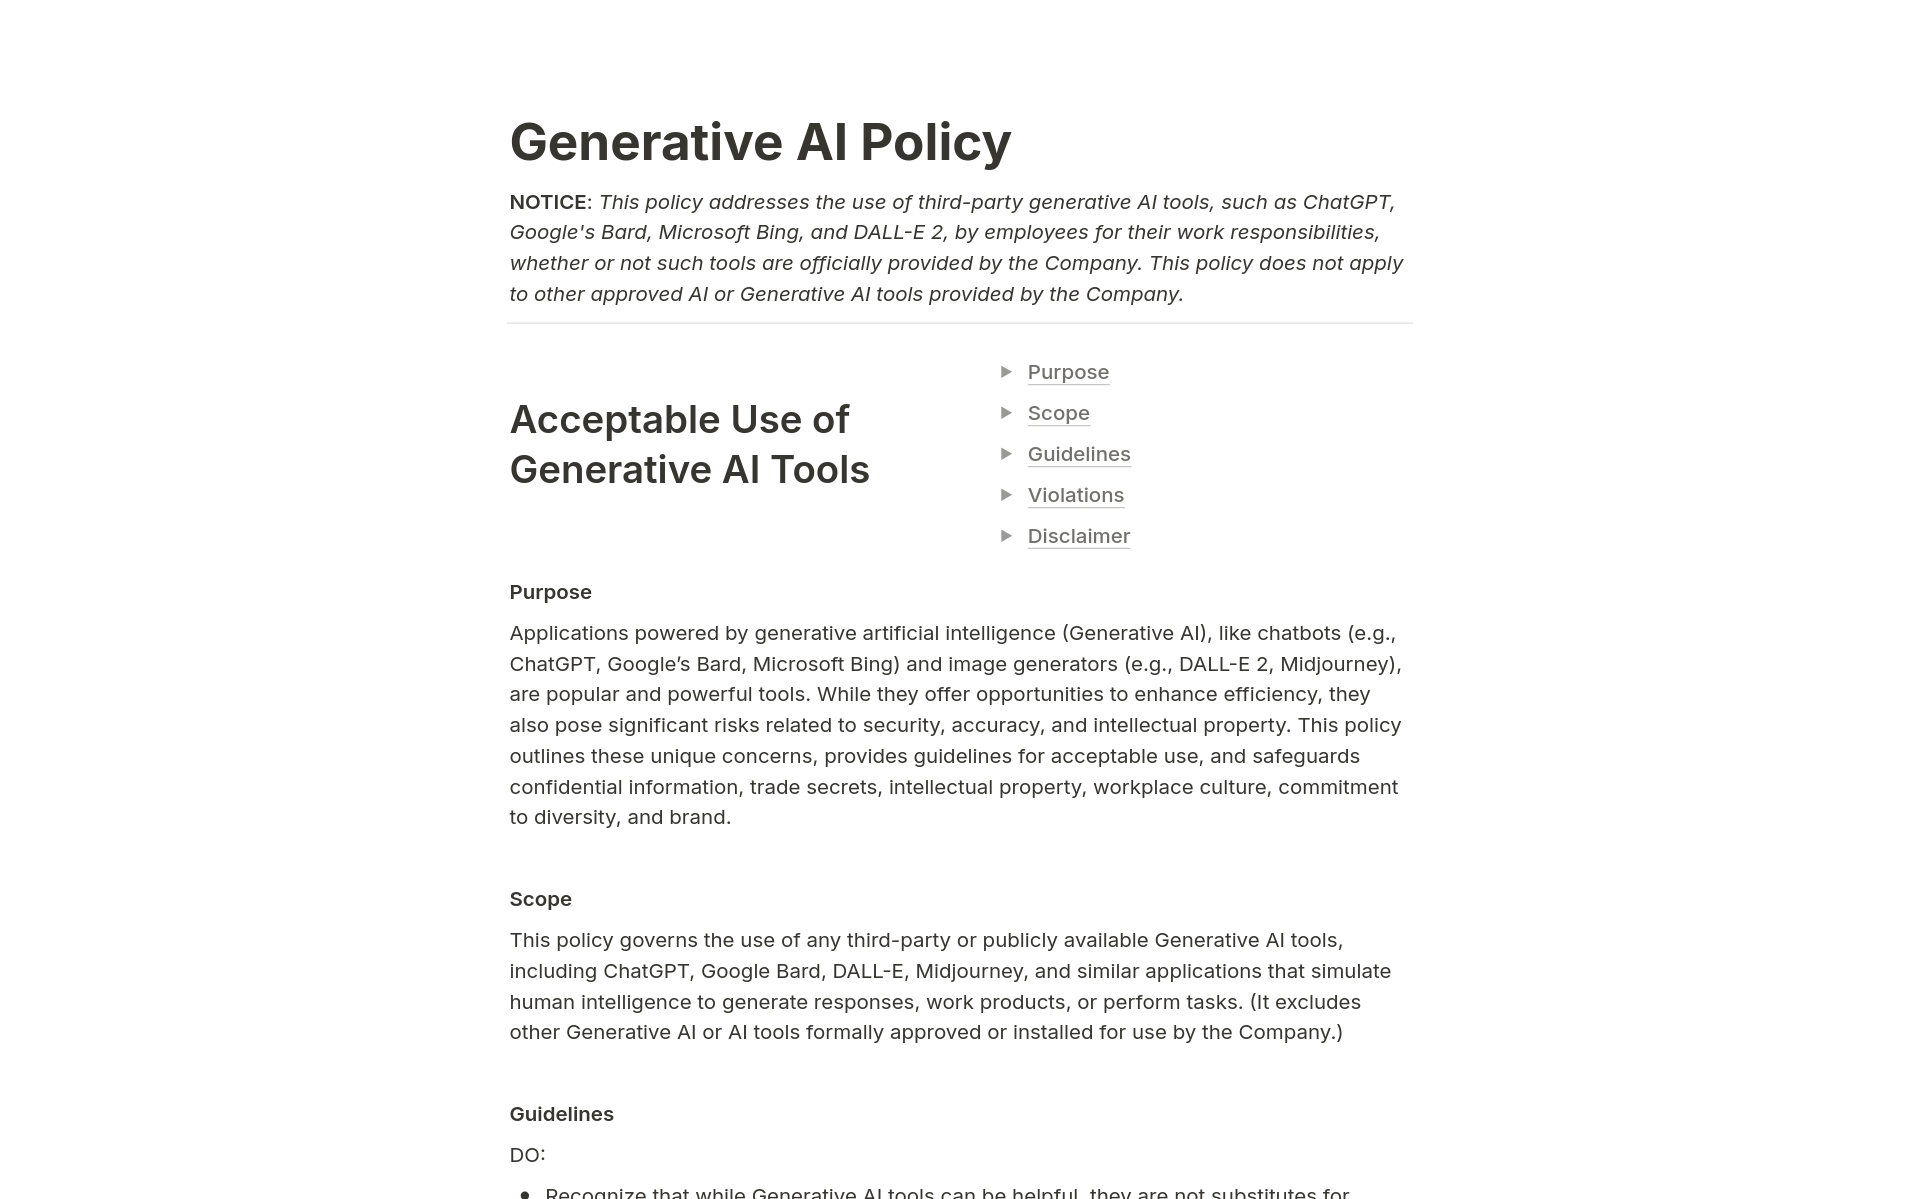 This template gives general language to create a Generative AI policy for organizations or projects that detail the acceptable use guidelines, violations and disclaimers associated with employee or participant use of third-party Generative AI tools.